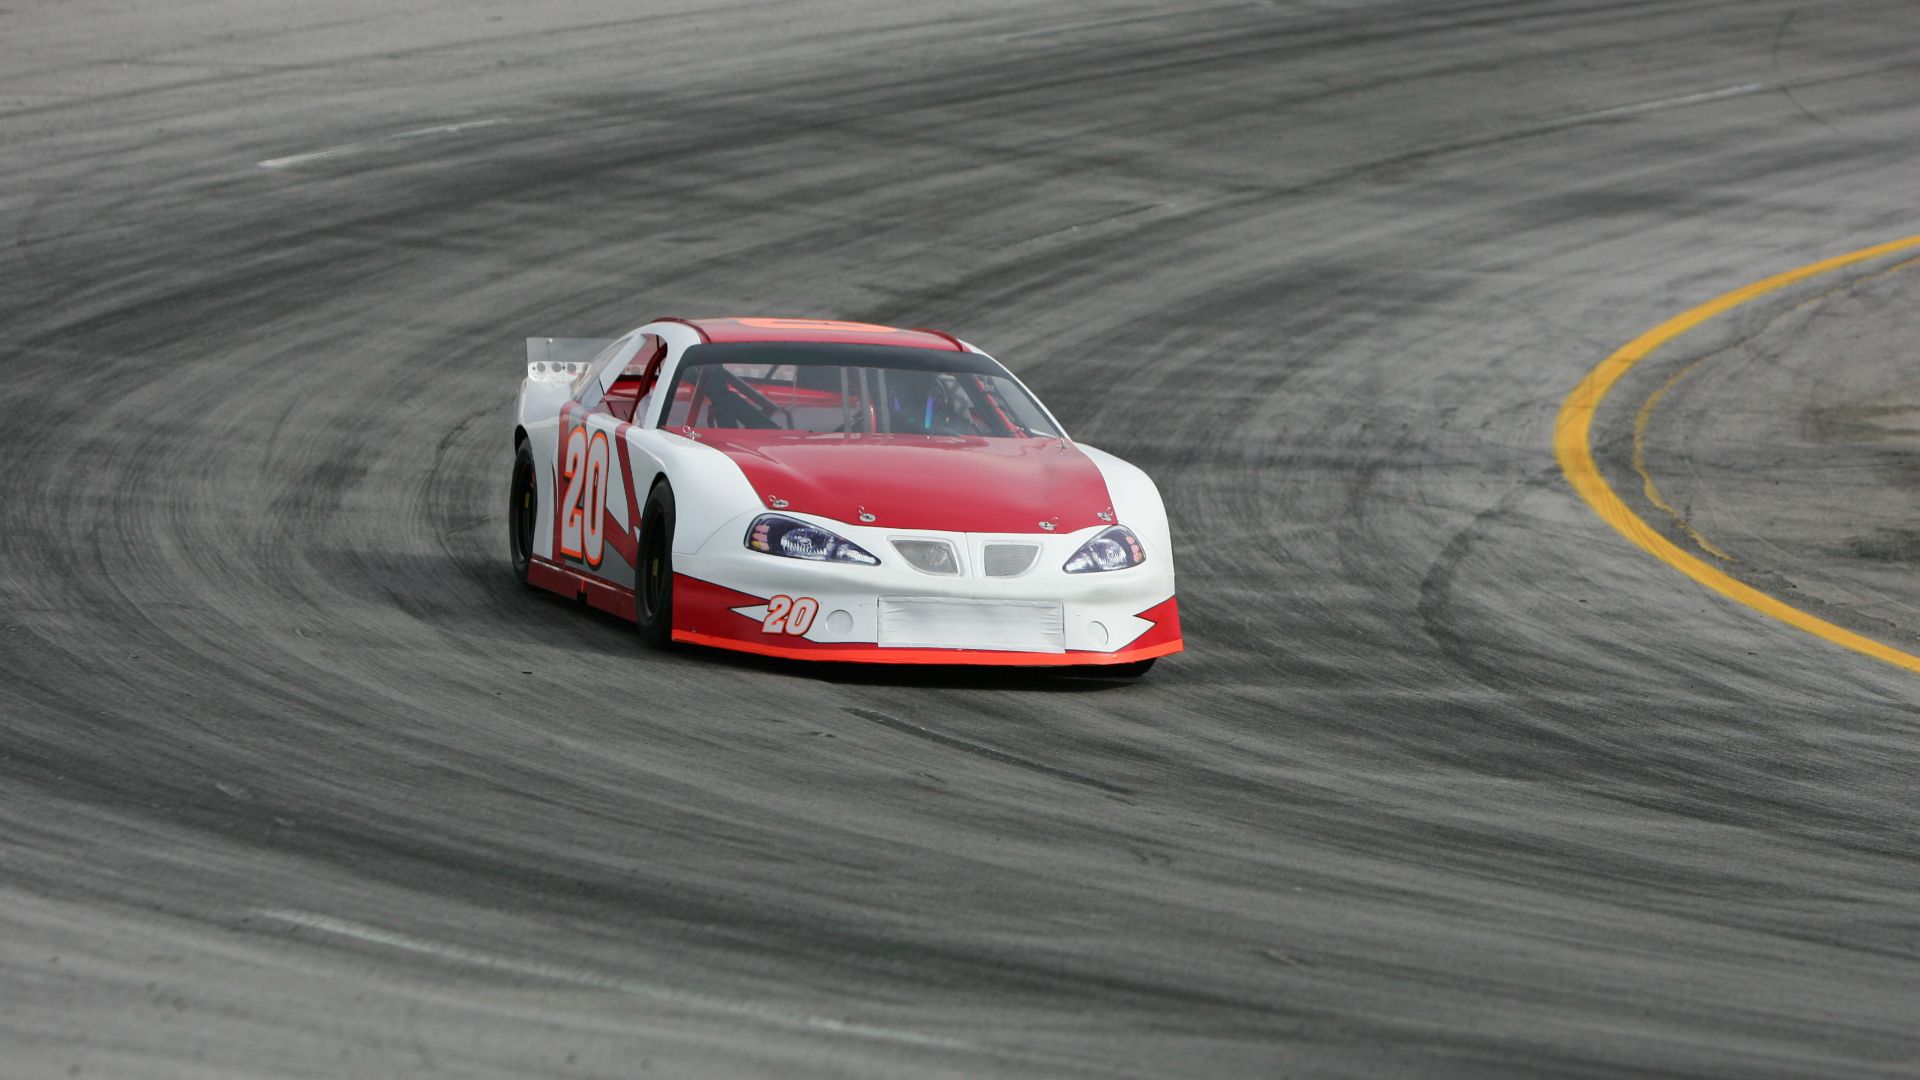 a red and white car driving on a race track.